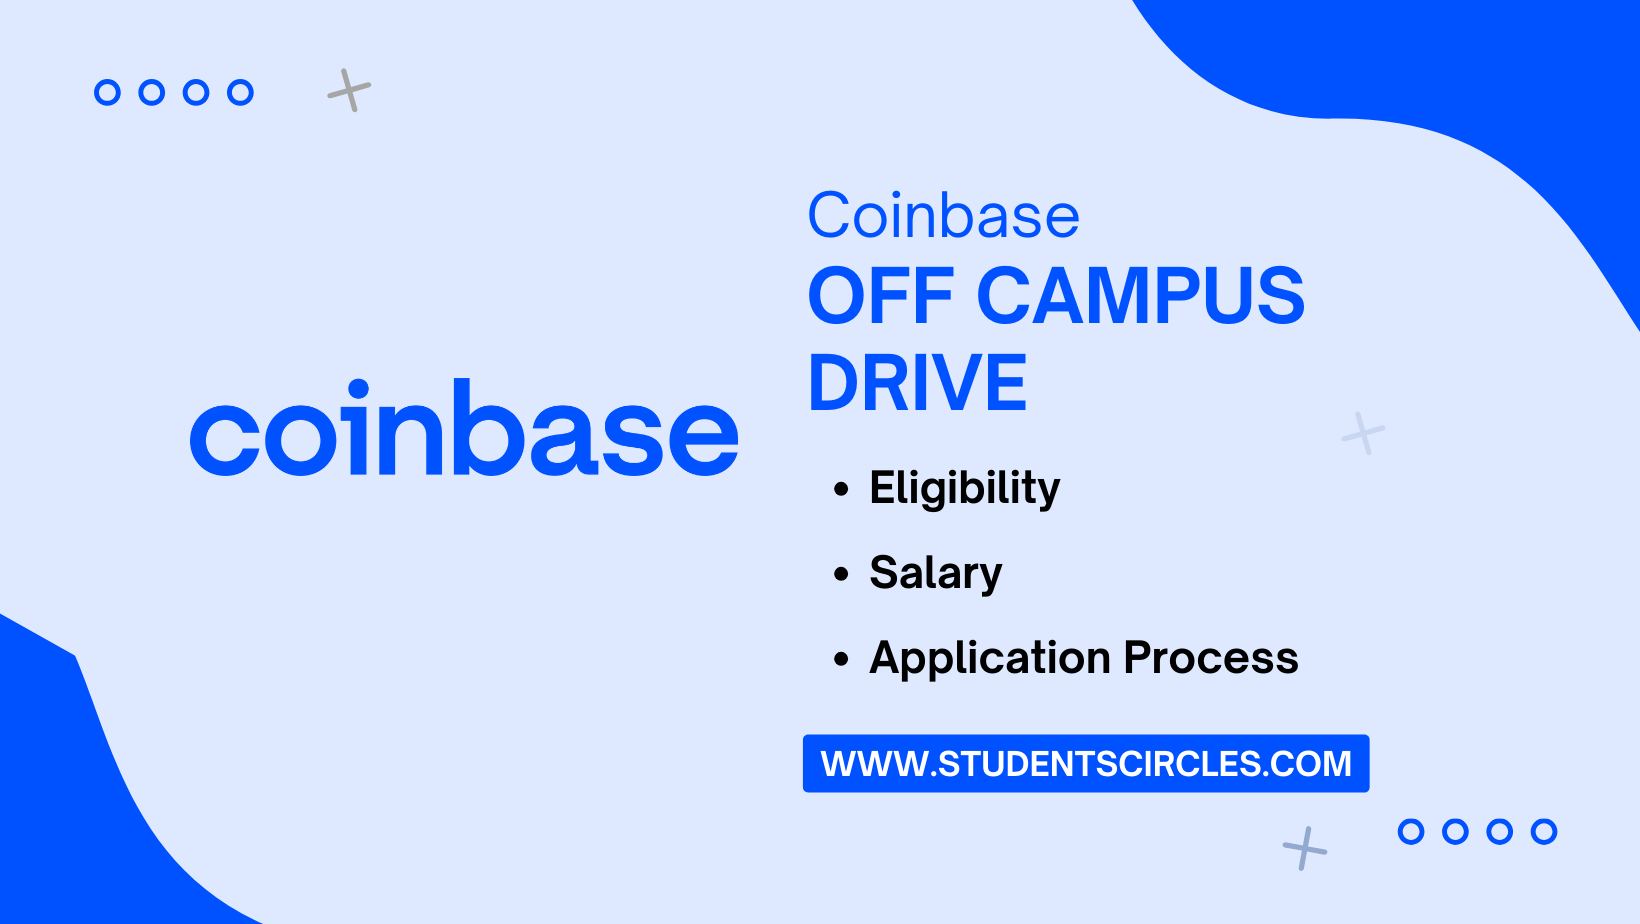 Coinbase Off Campus Drive